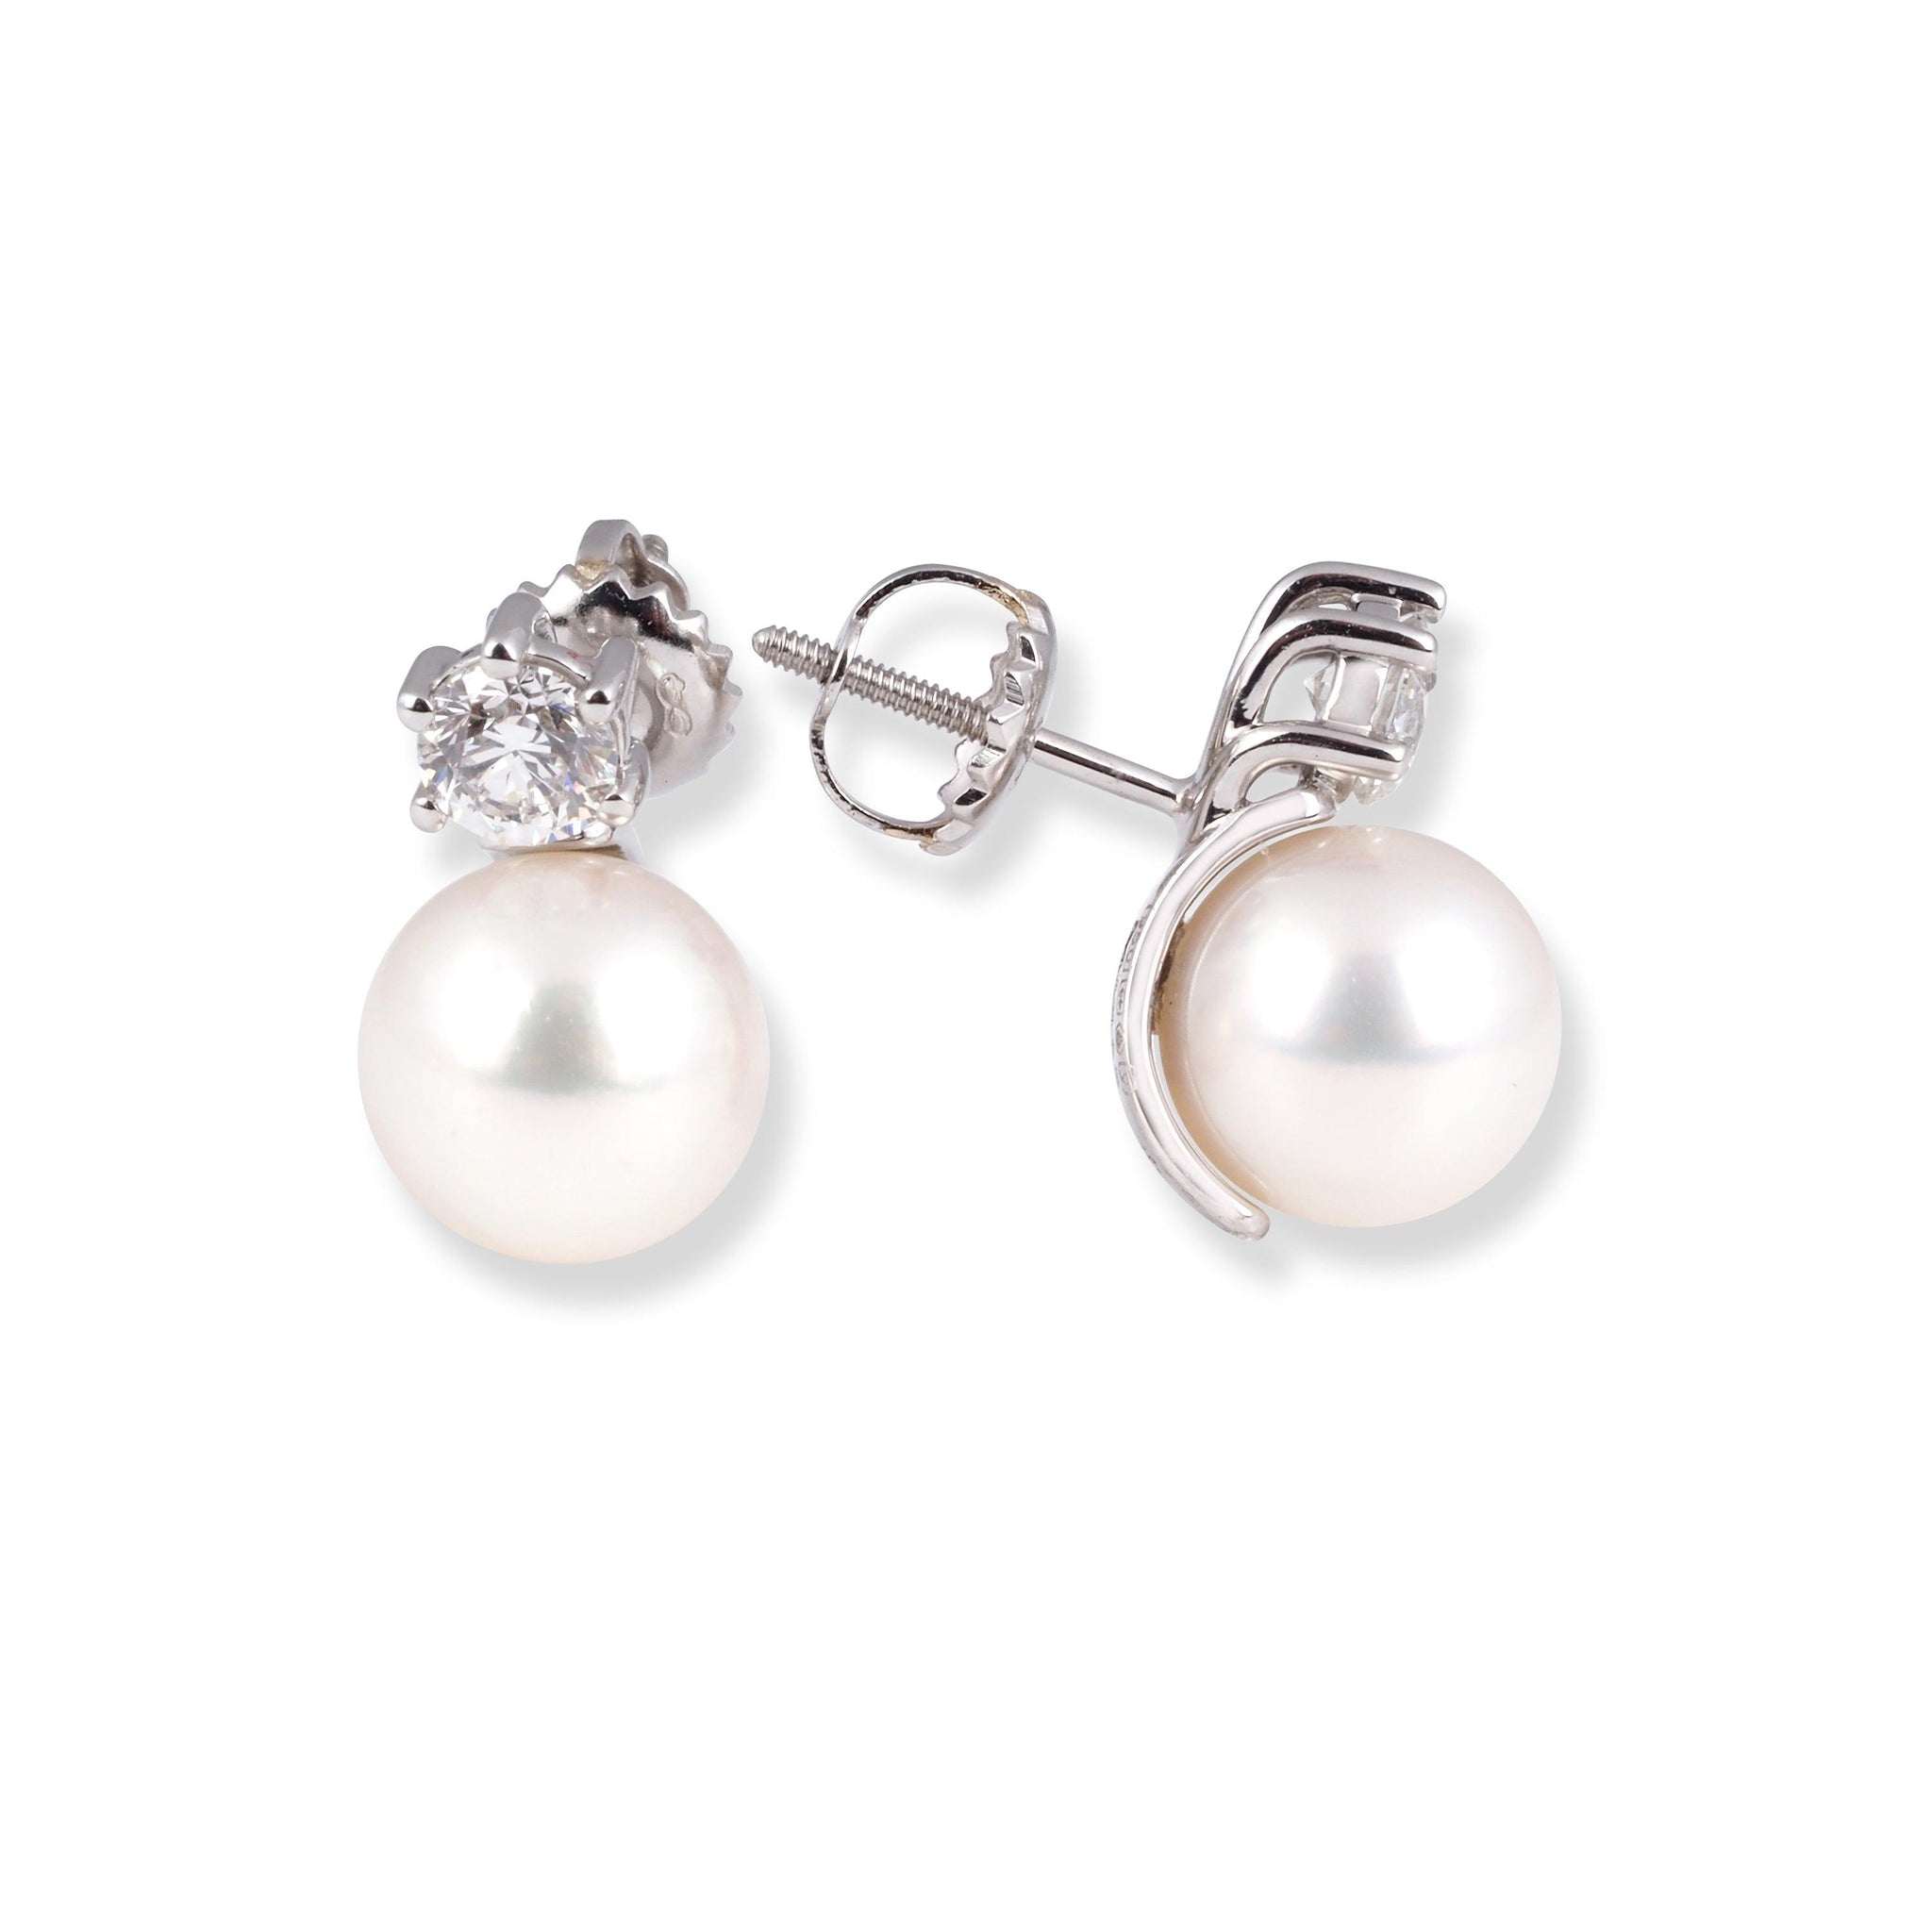 18ct White Gold Diamond and Cultured Pearl Earrings EC53549-2